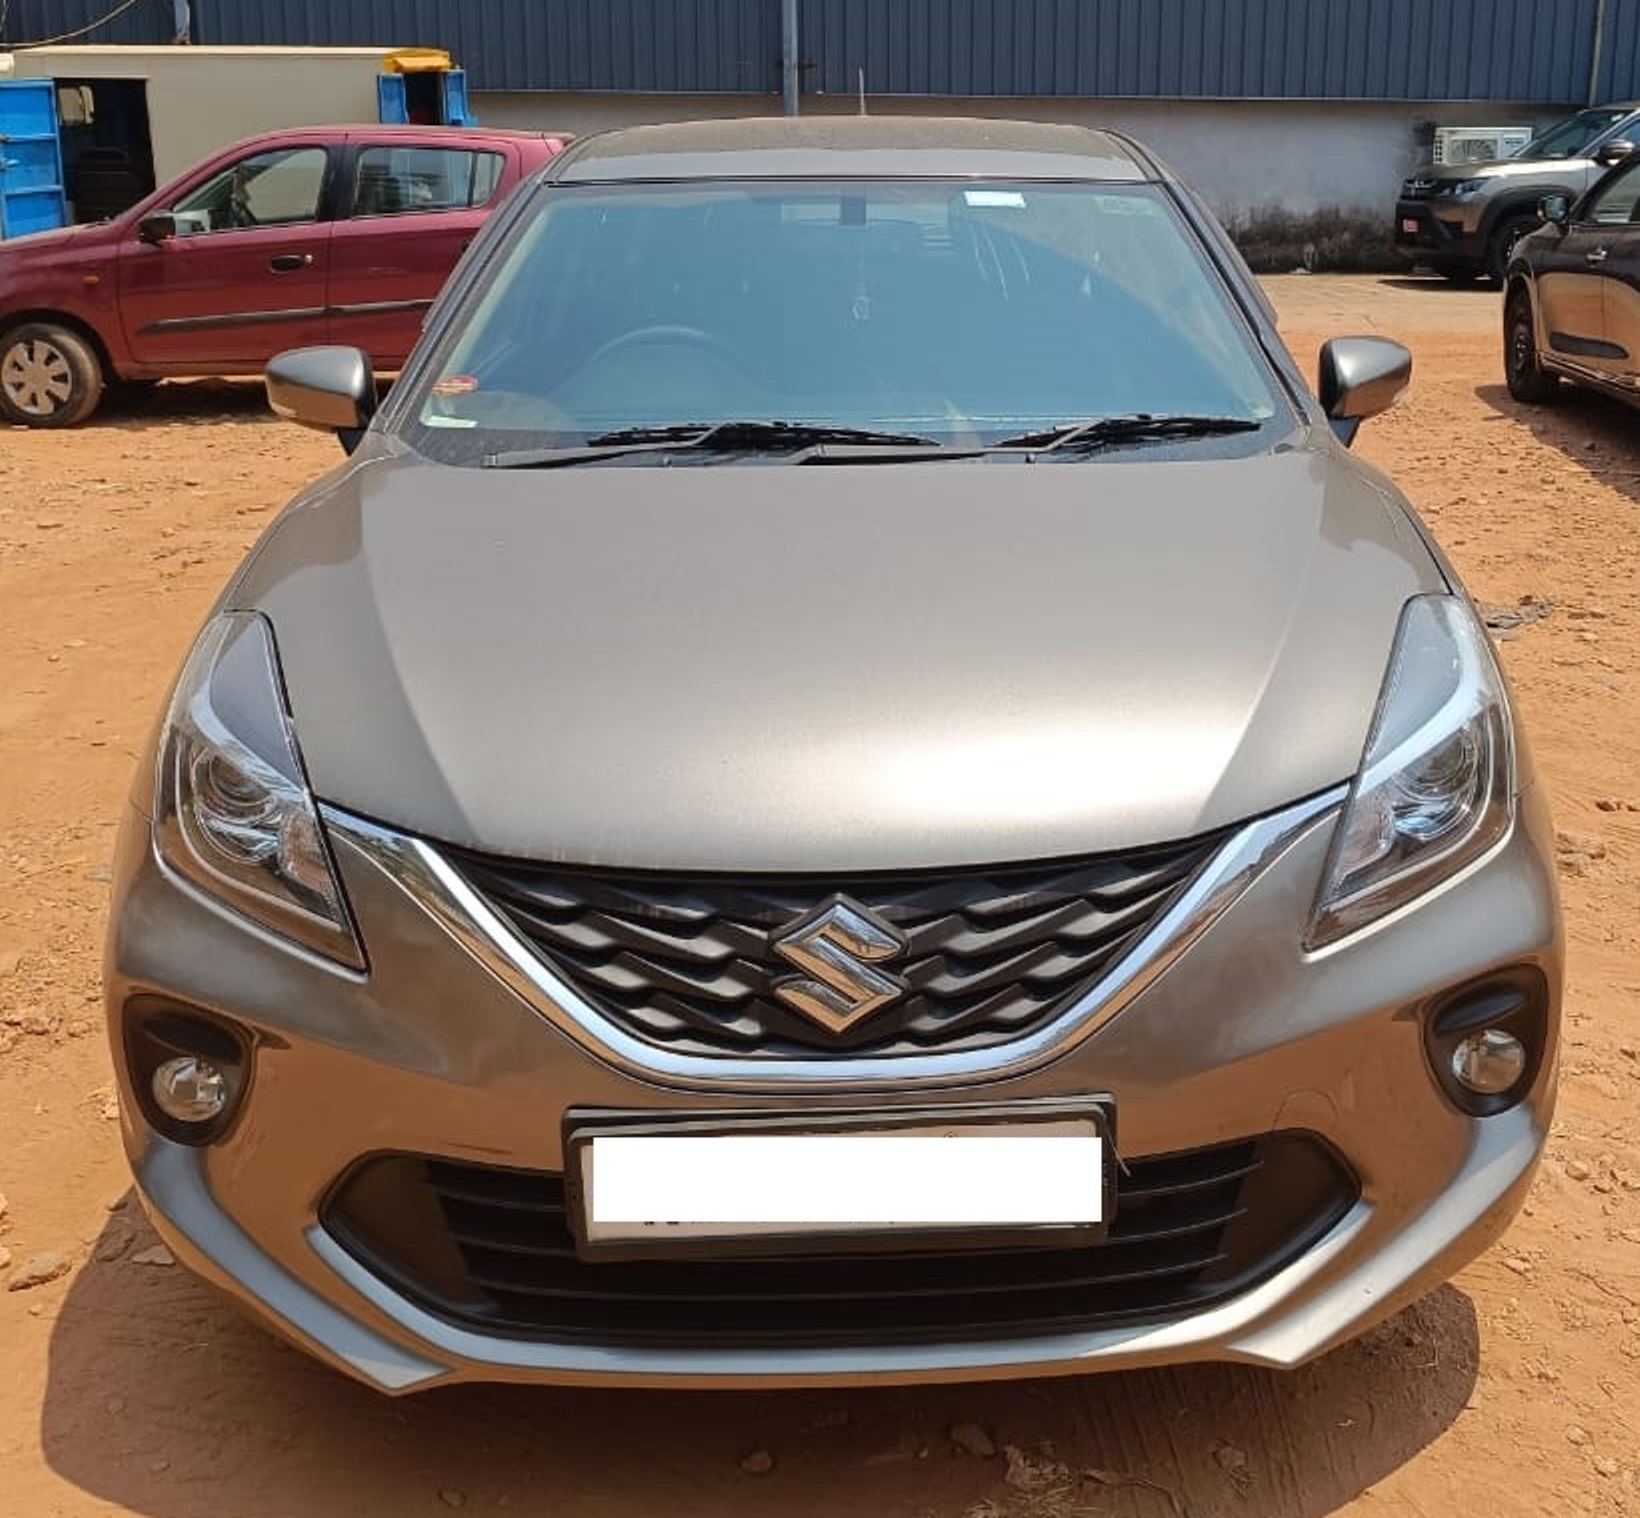 MARUTI BALENO 2020 Second-hand Car for Sale in Kannur